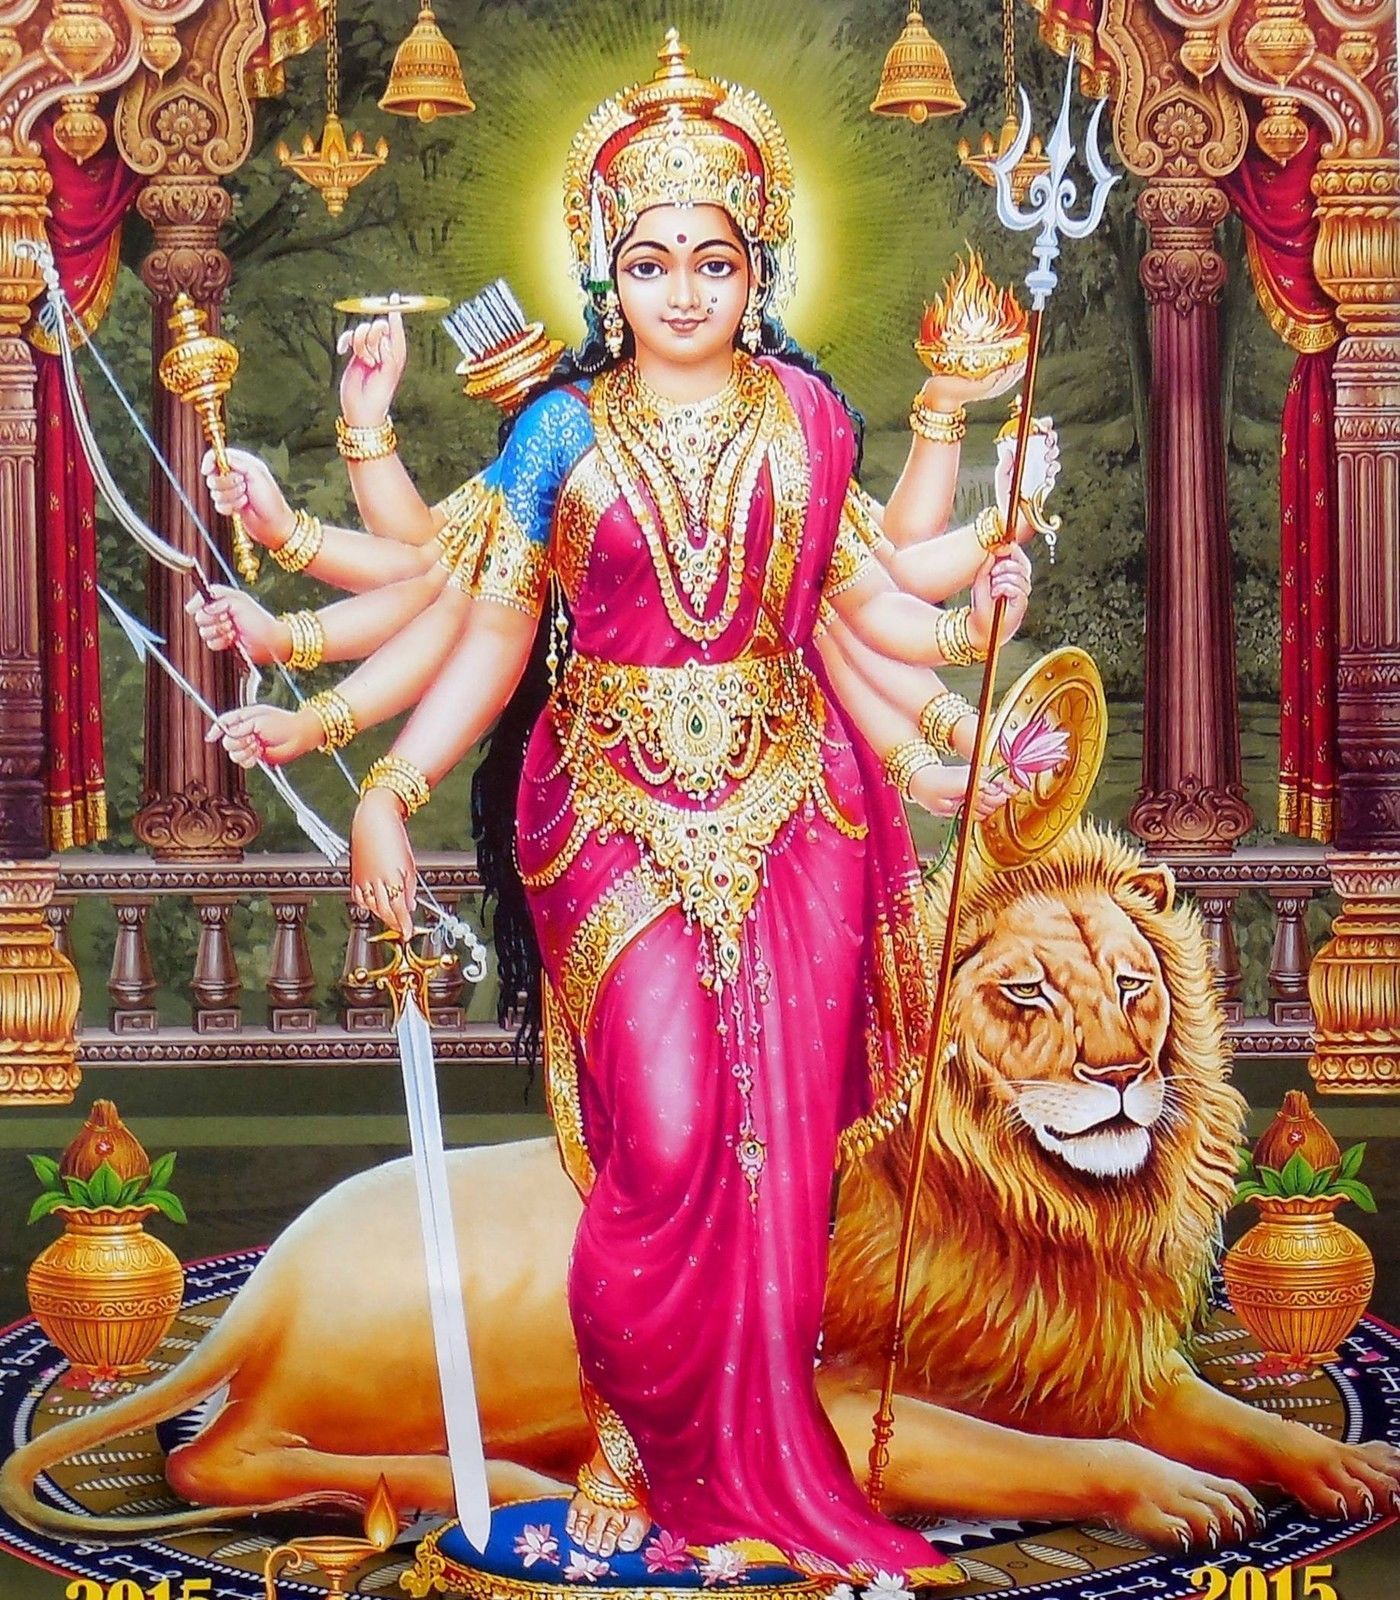 The Most Unique and Beautiful Collection of Maa Durga Image!